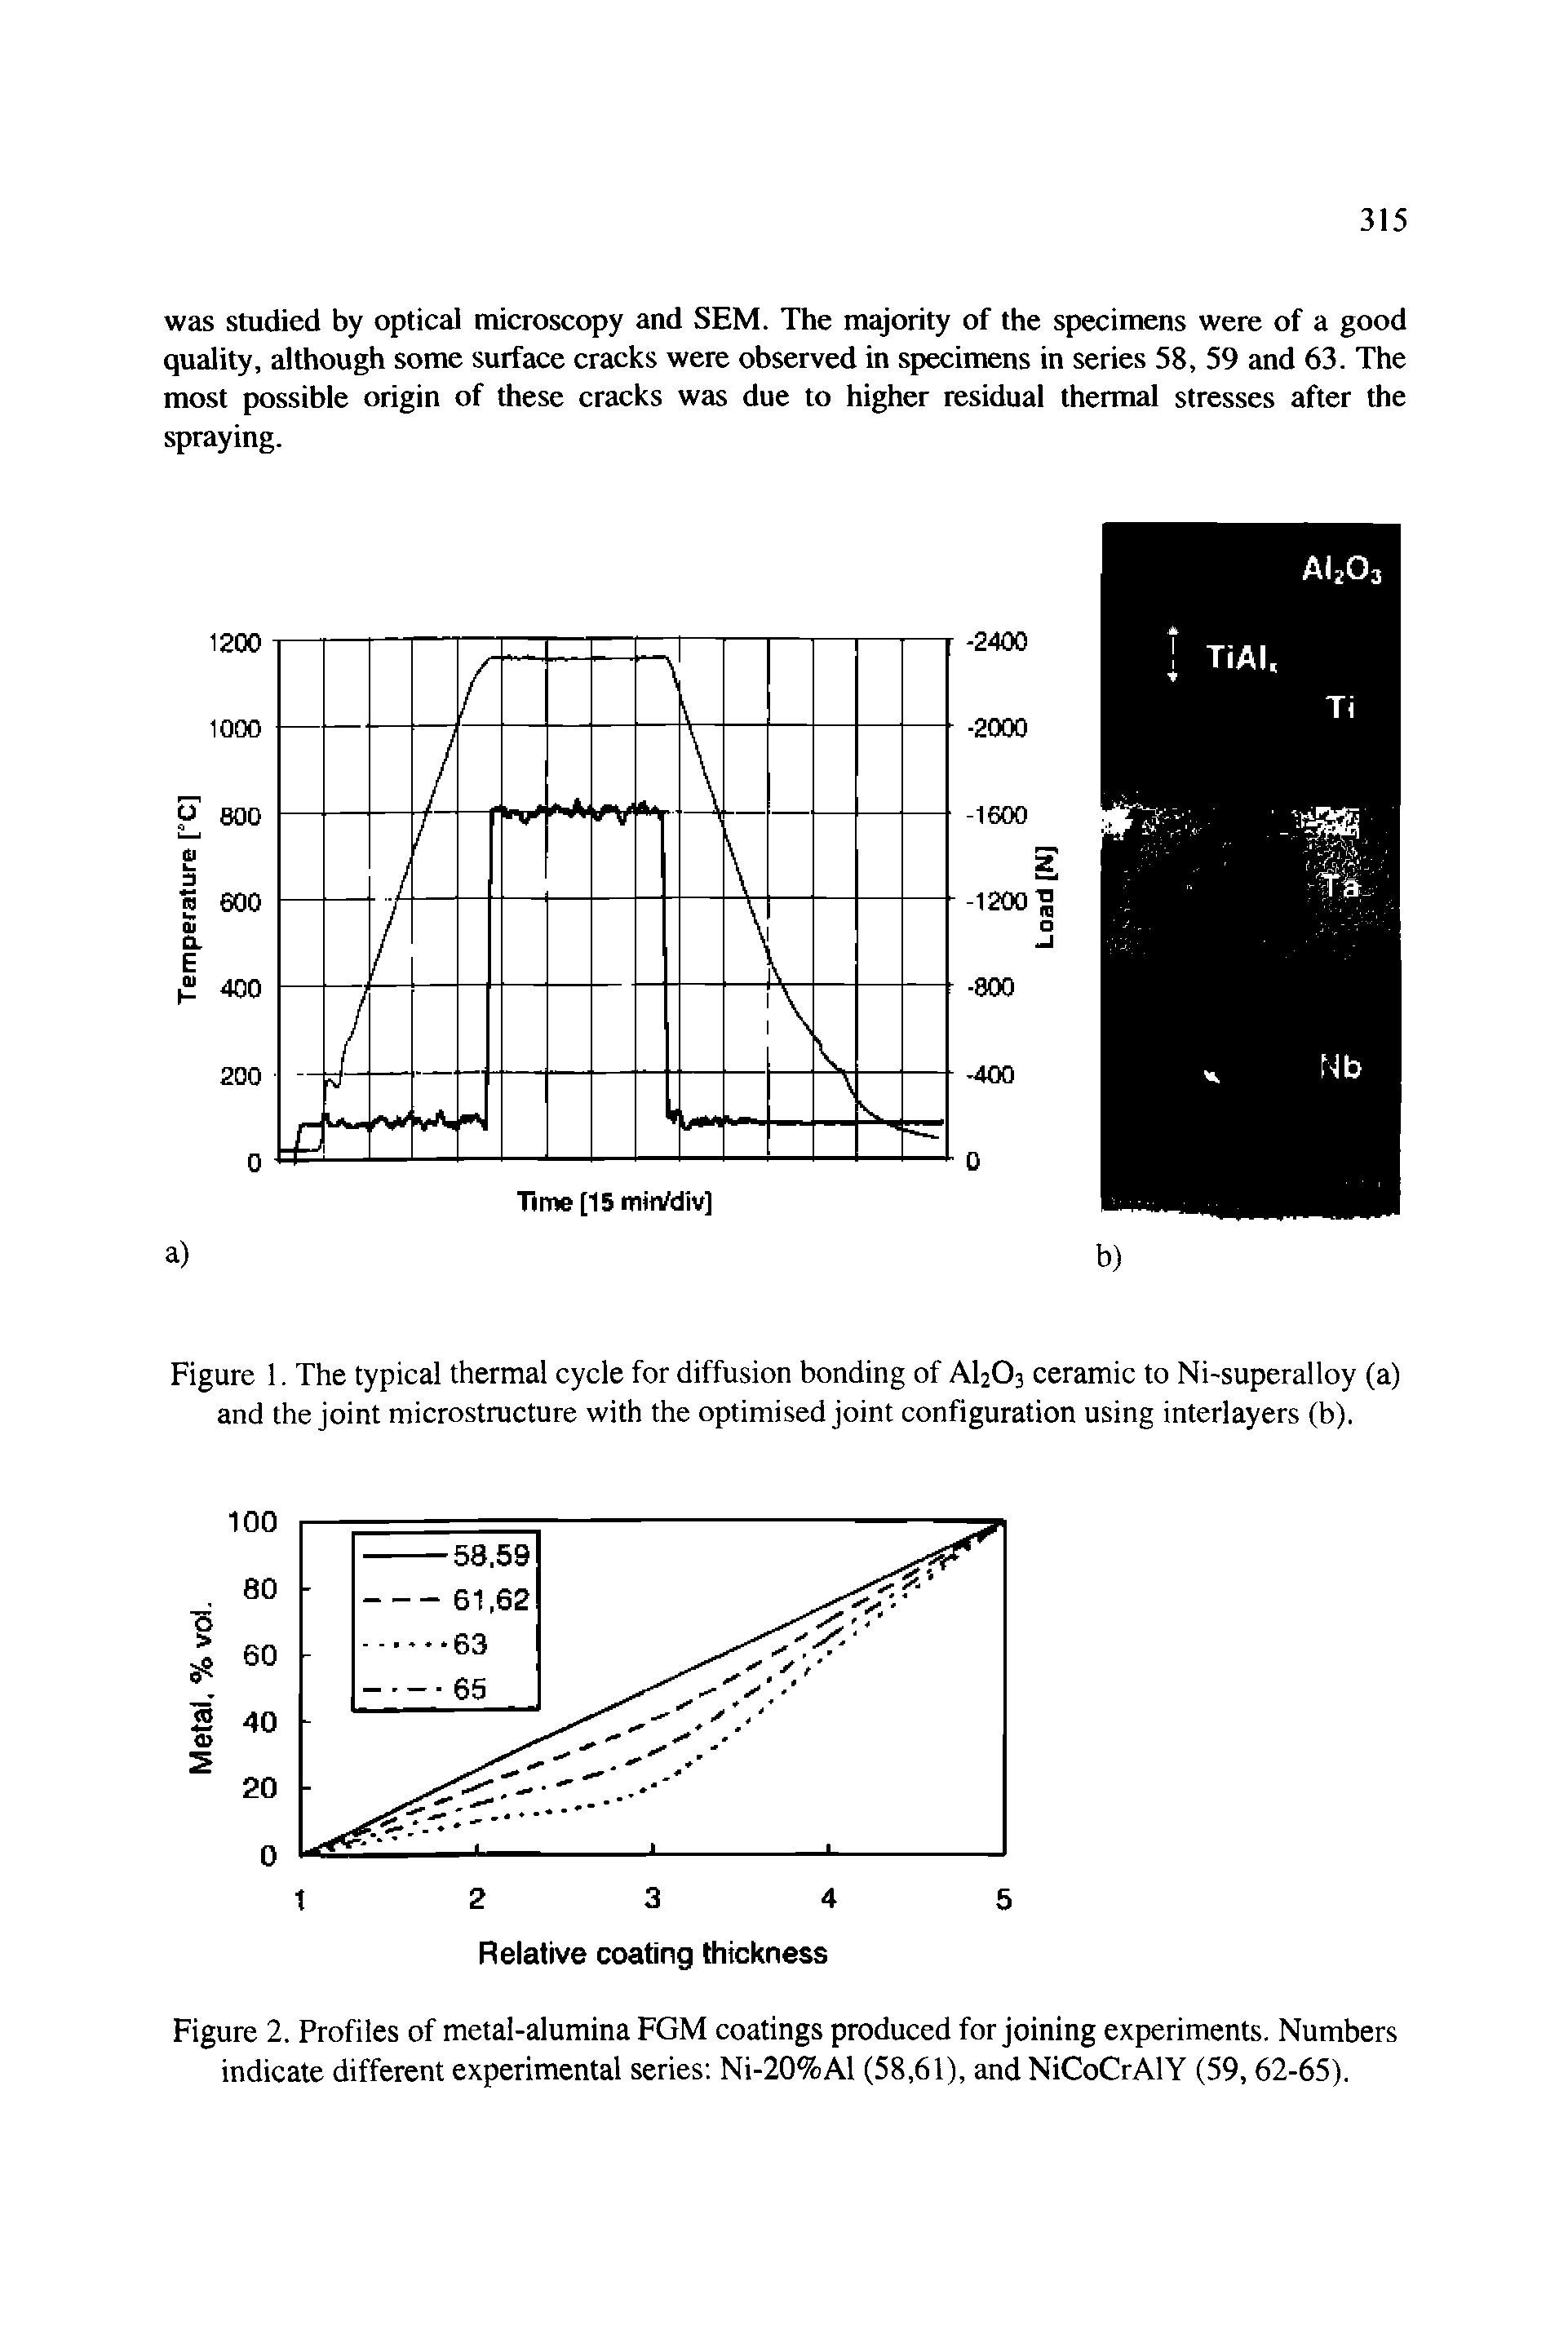 Figure 1. The typical thermal cycle for diffusion bonding of AI2O3 ceramic to Ni-superalloy (a) and the joint microstructure with the optimised joint configuration using interlayers (b).